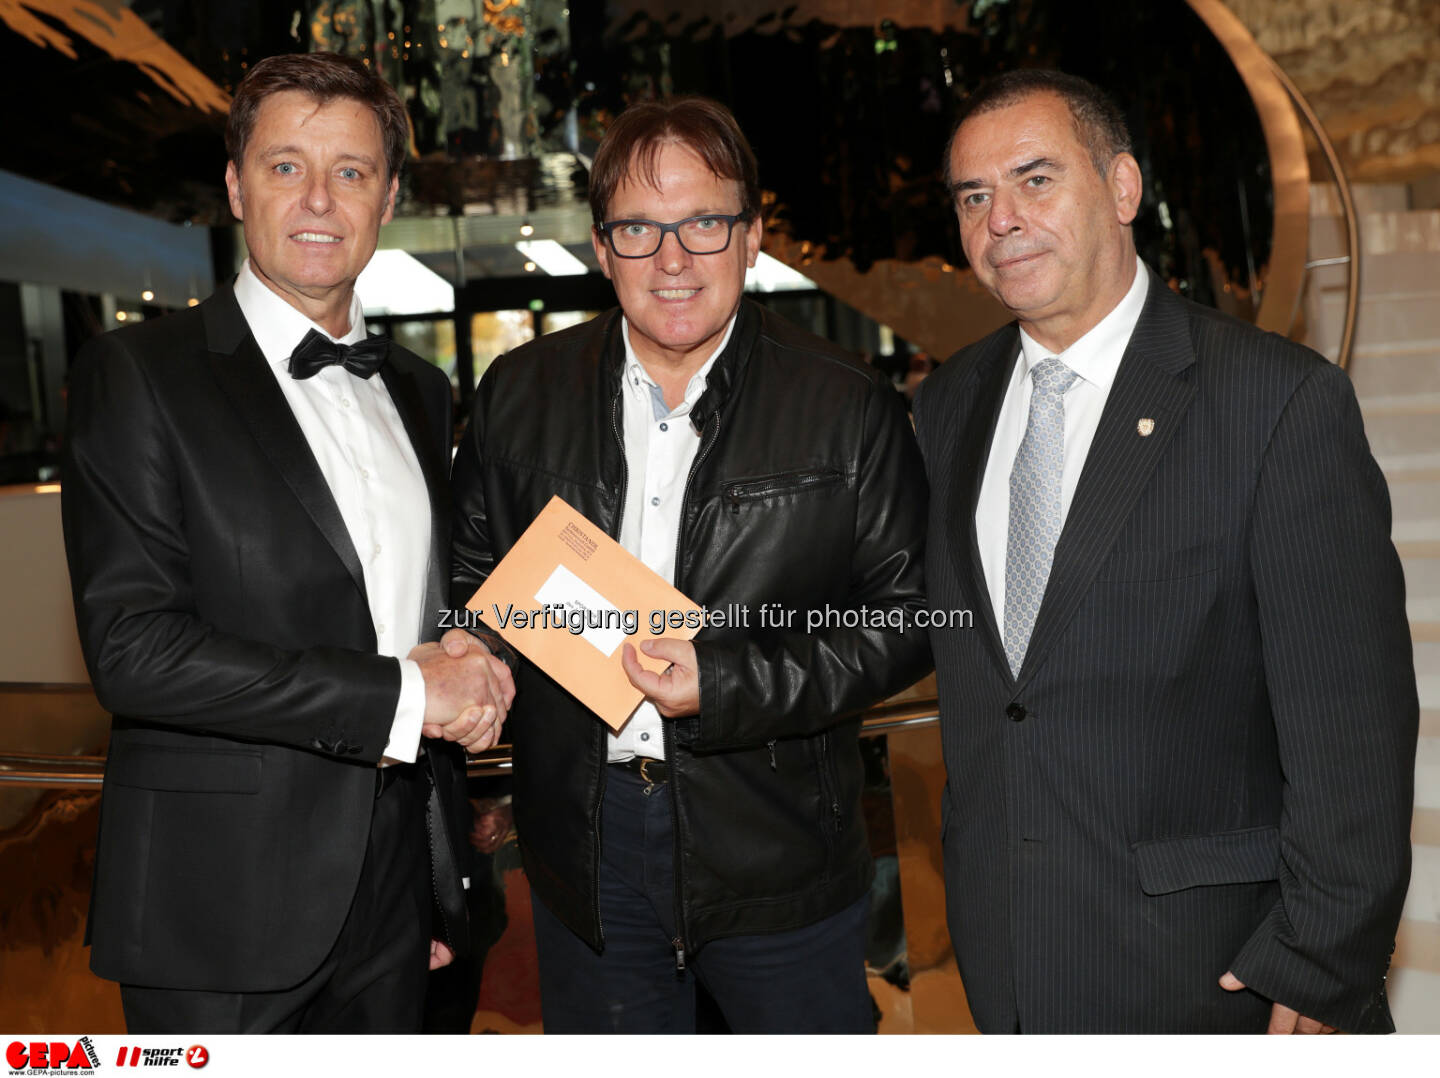 Harald Bauer (Sporthilfe), notary Harald Christandl and general secretary Joe Langer (Sports Media). Photo: GEPA pictures/ Walter Luger